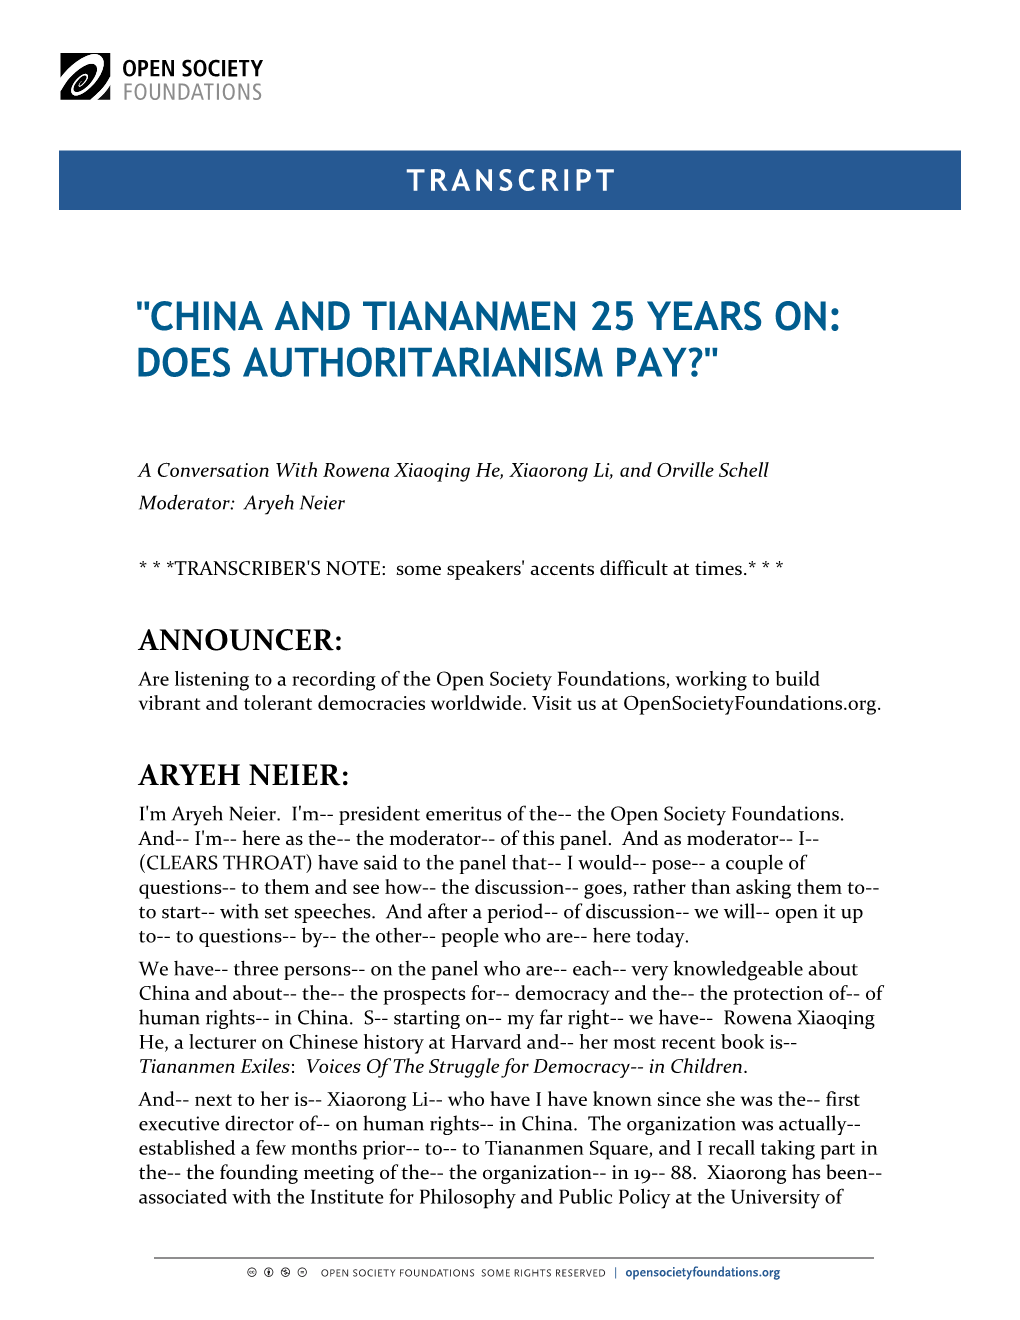 "China and Tiananmen 25 Years On: Does Authoritarianism Pay?"